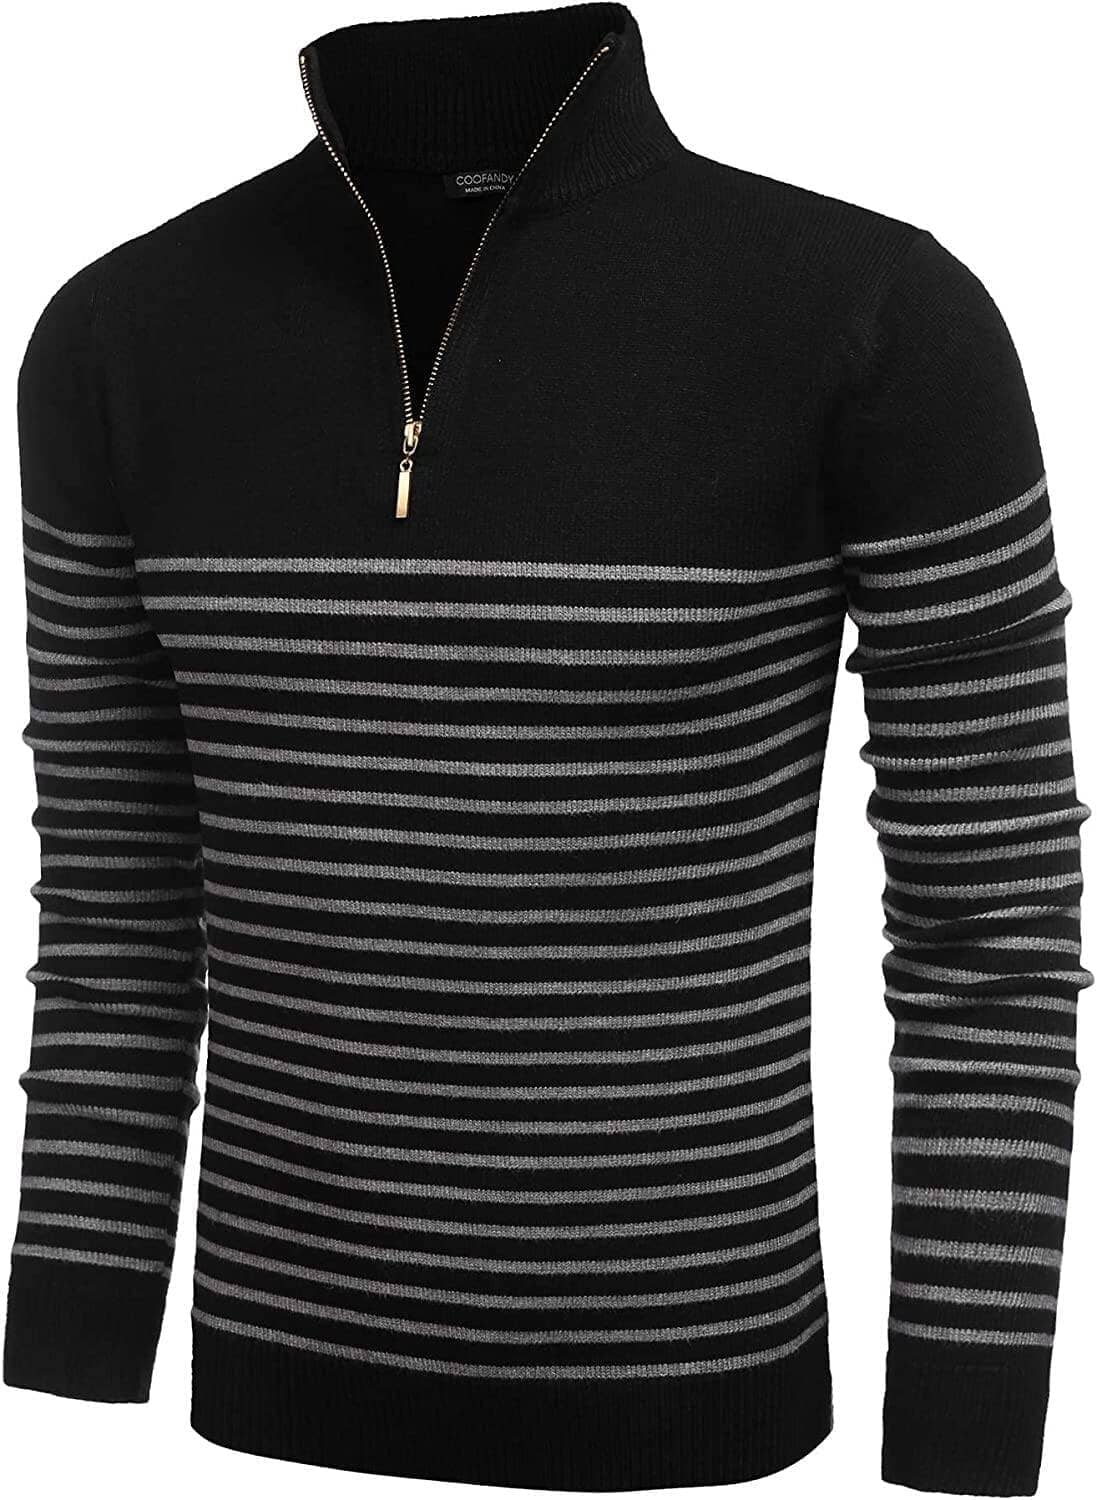 Striped Zip Up Mock Neck Pullover Sweaters (US Only) Sweaters COOFANDY Store Black S 